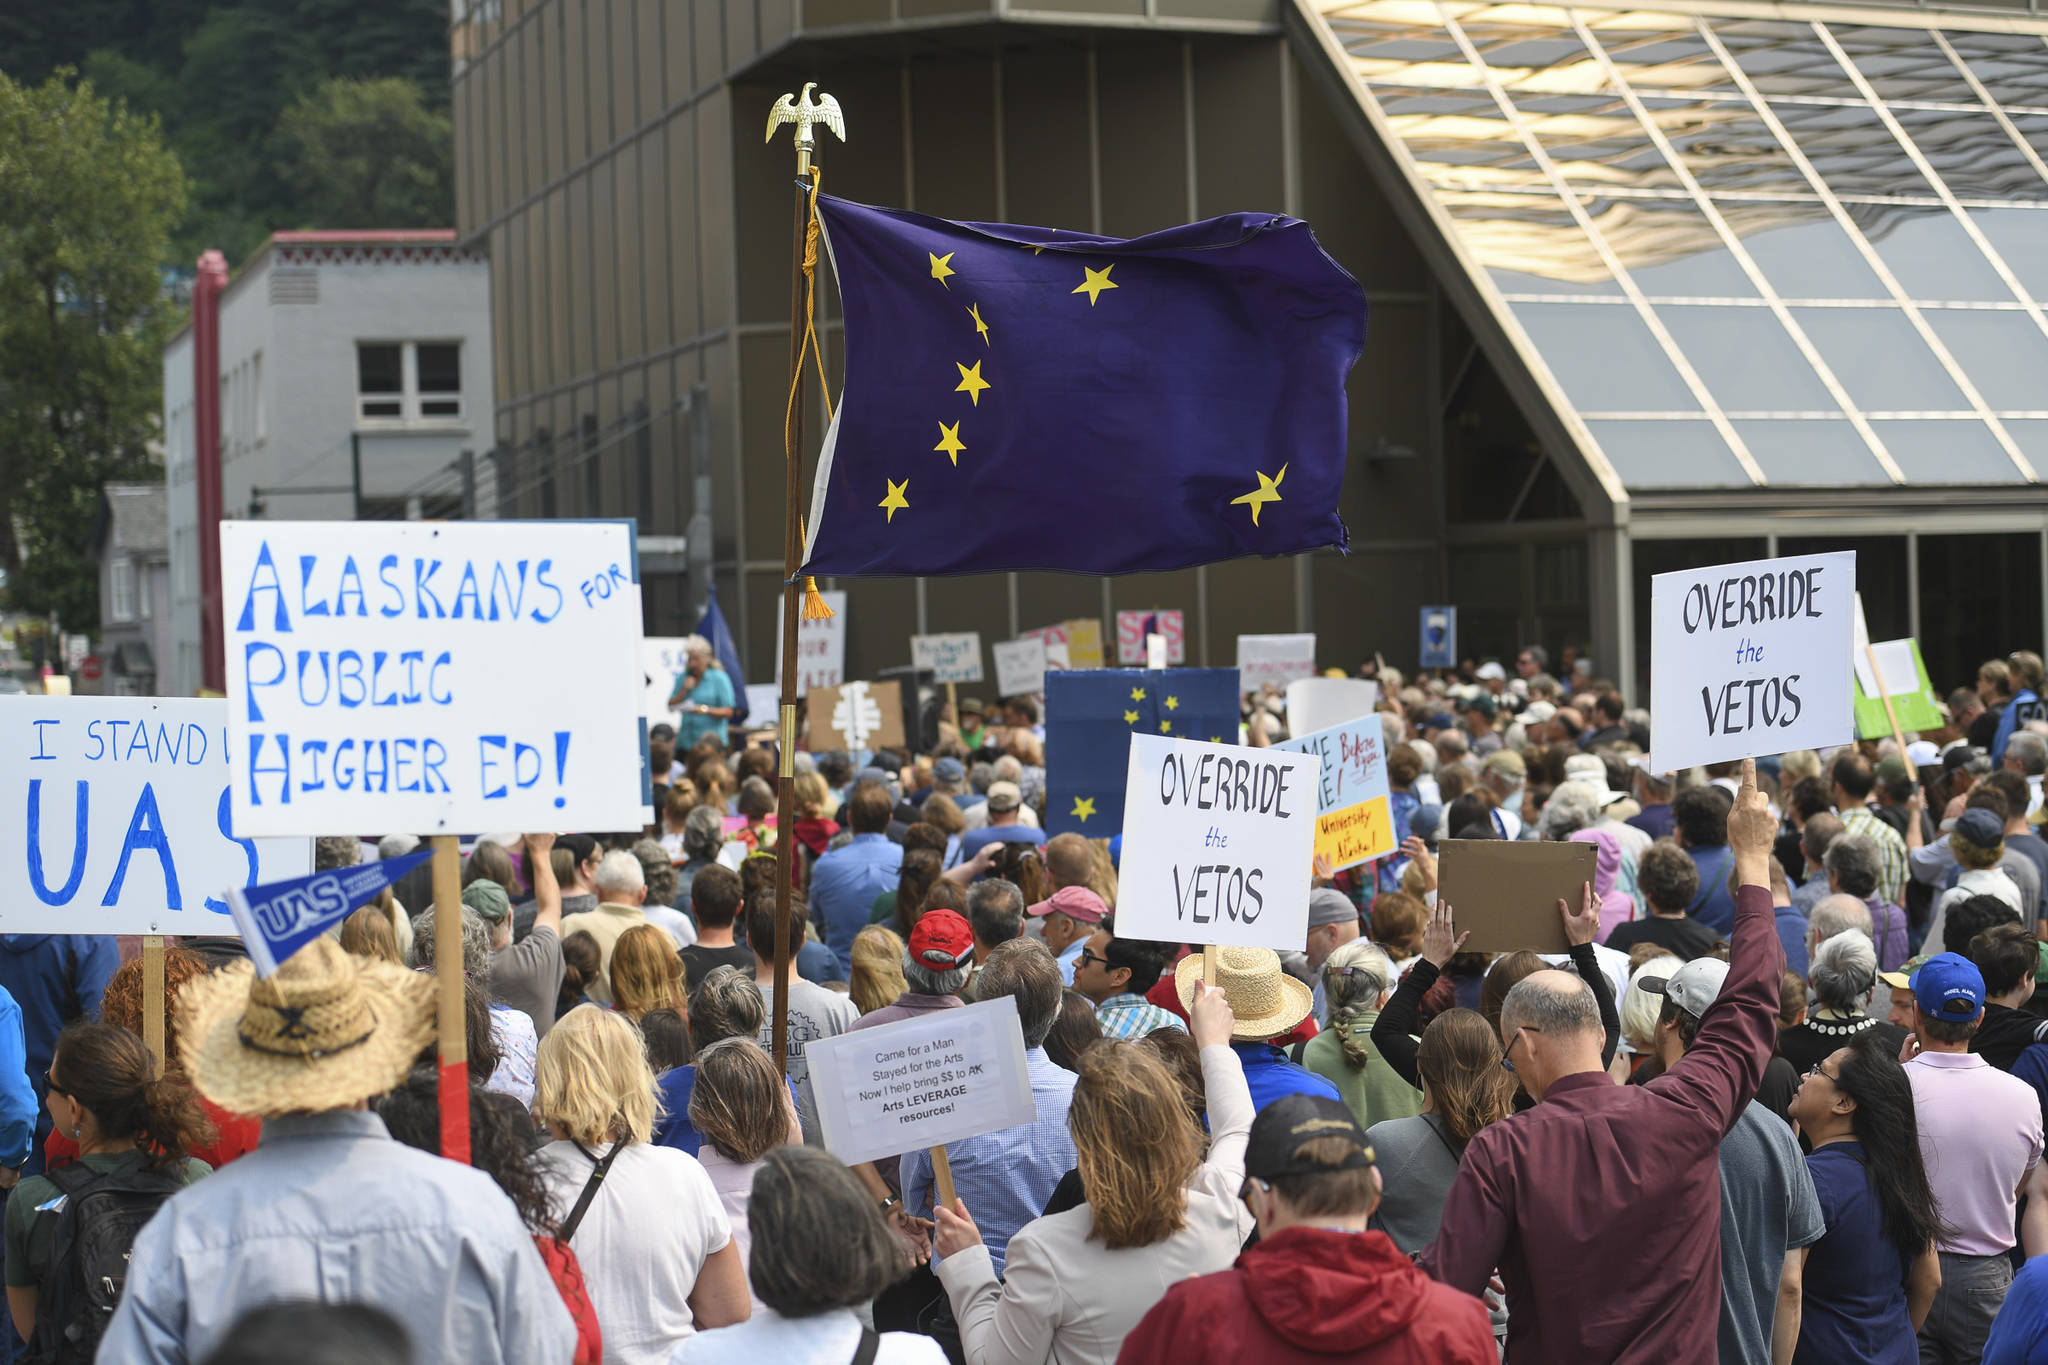 Hundreds attend a rally in front of the Capitol calling for an override of Gov. Mike Dunleavy’s budget vetos on the first day of the Second Special Session of the Alaska Legislature in Juneau on Monday, July 8, 2019. (Michael Penn | Juneau Empire)